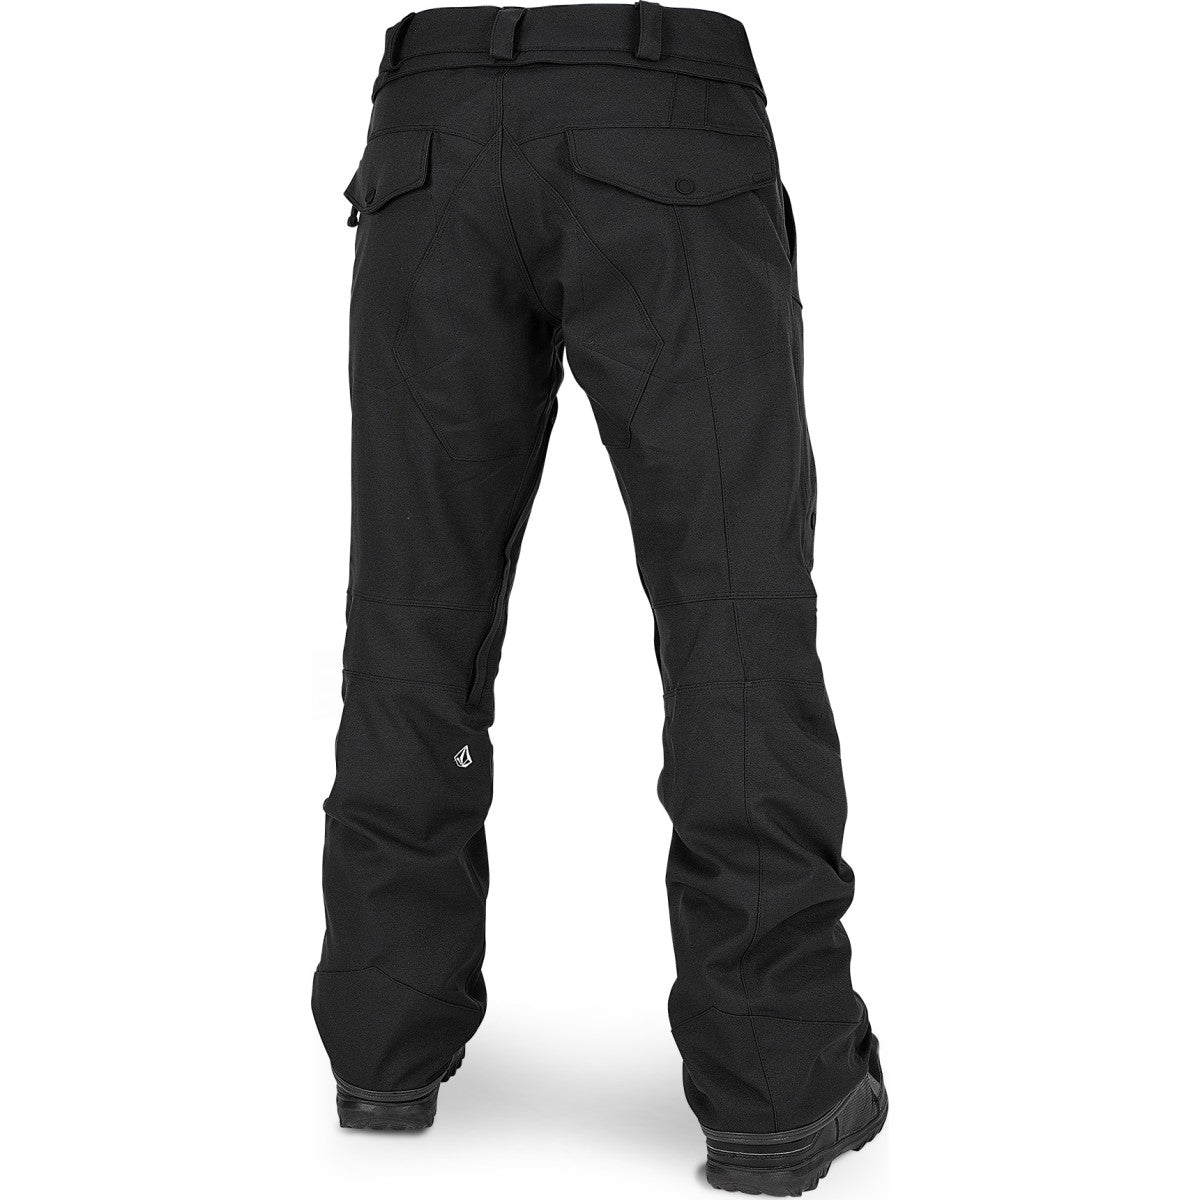 ARTICULATED PANT – SURF SIDE SPORTS